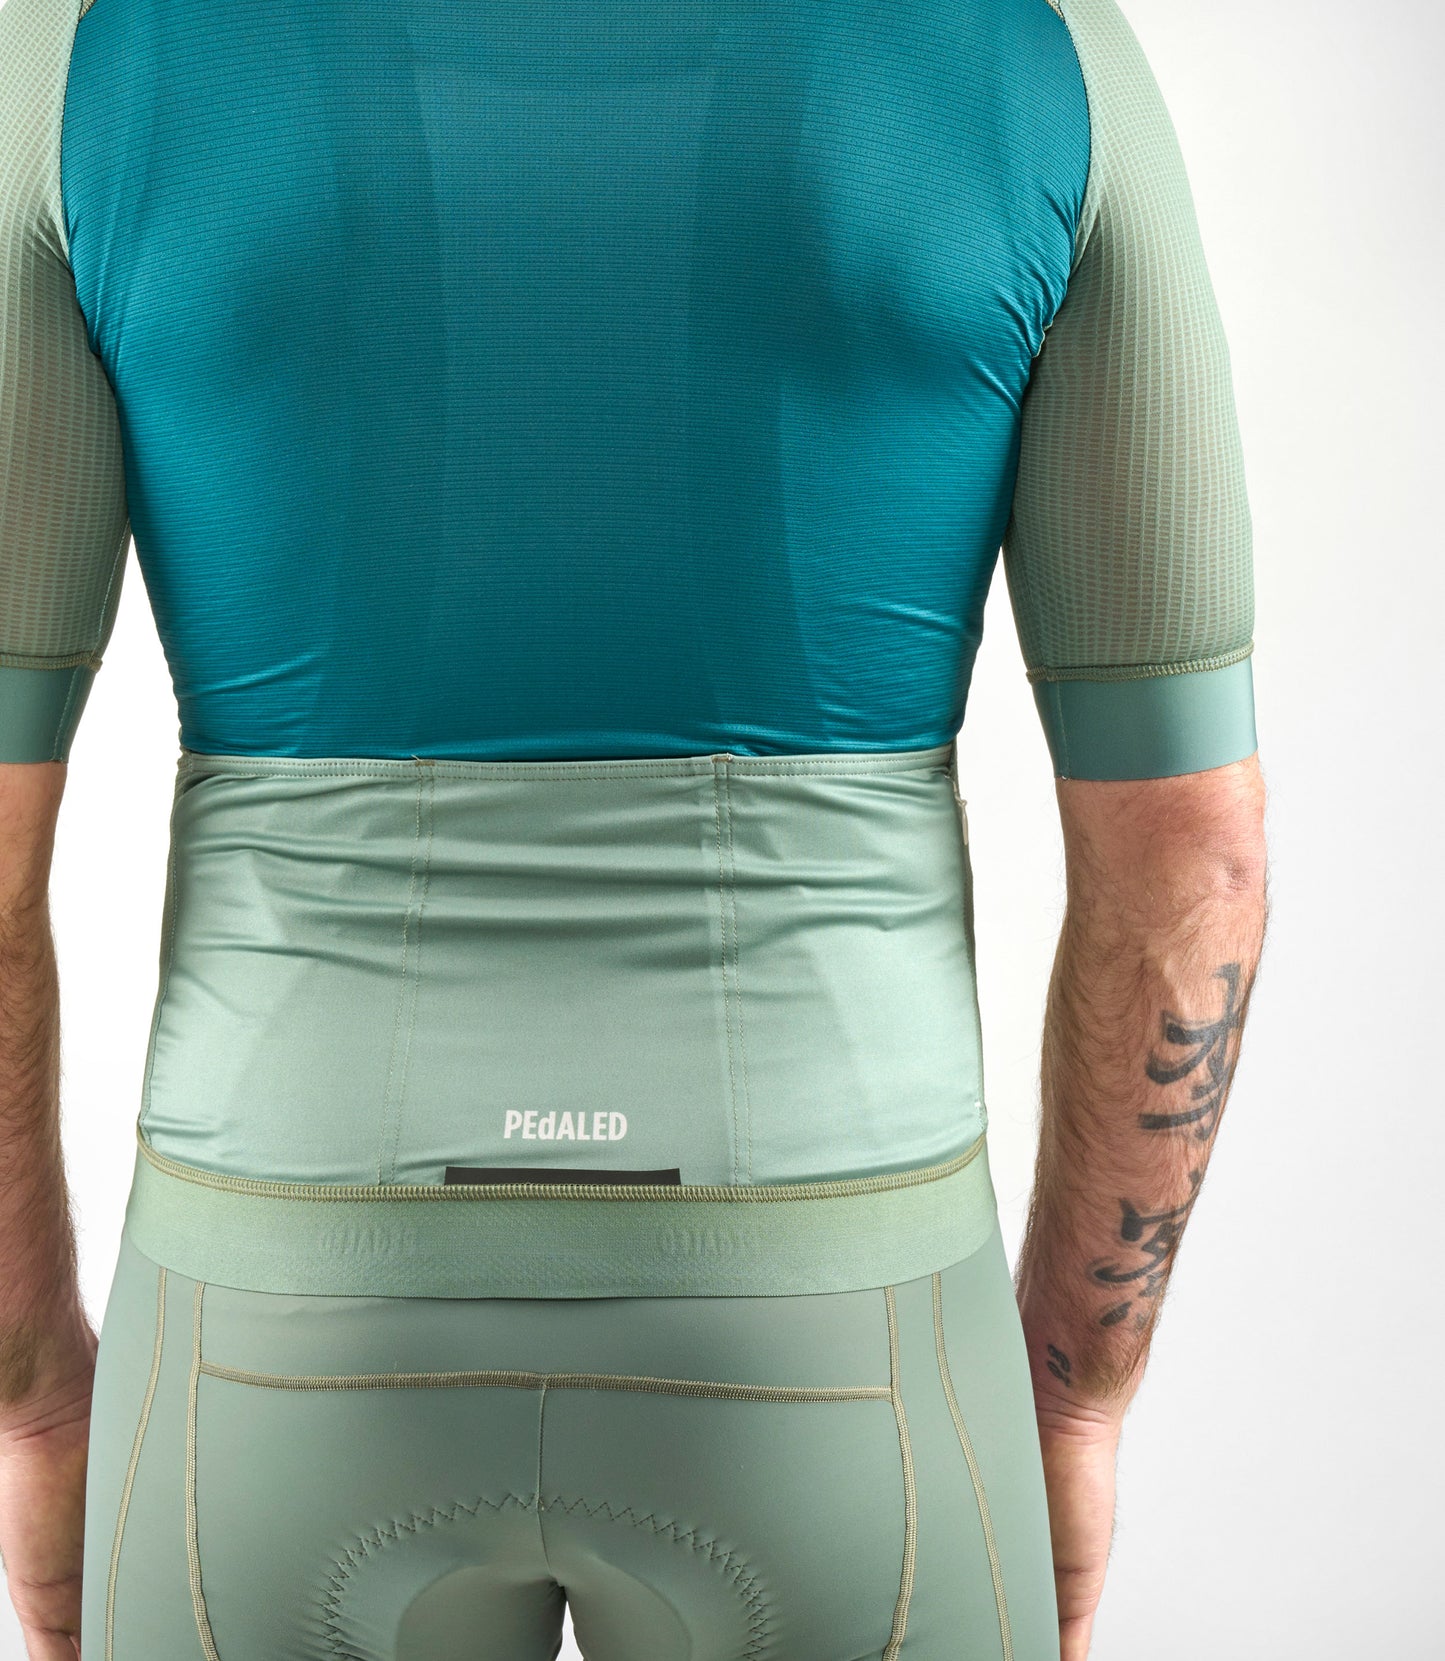 PEDALED Element Jersey (Light Green)